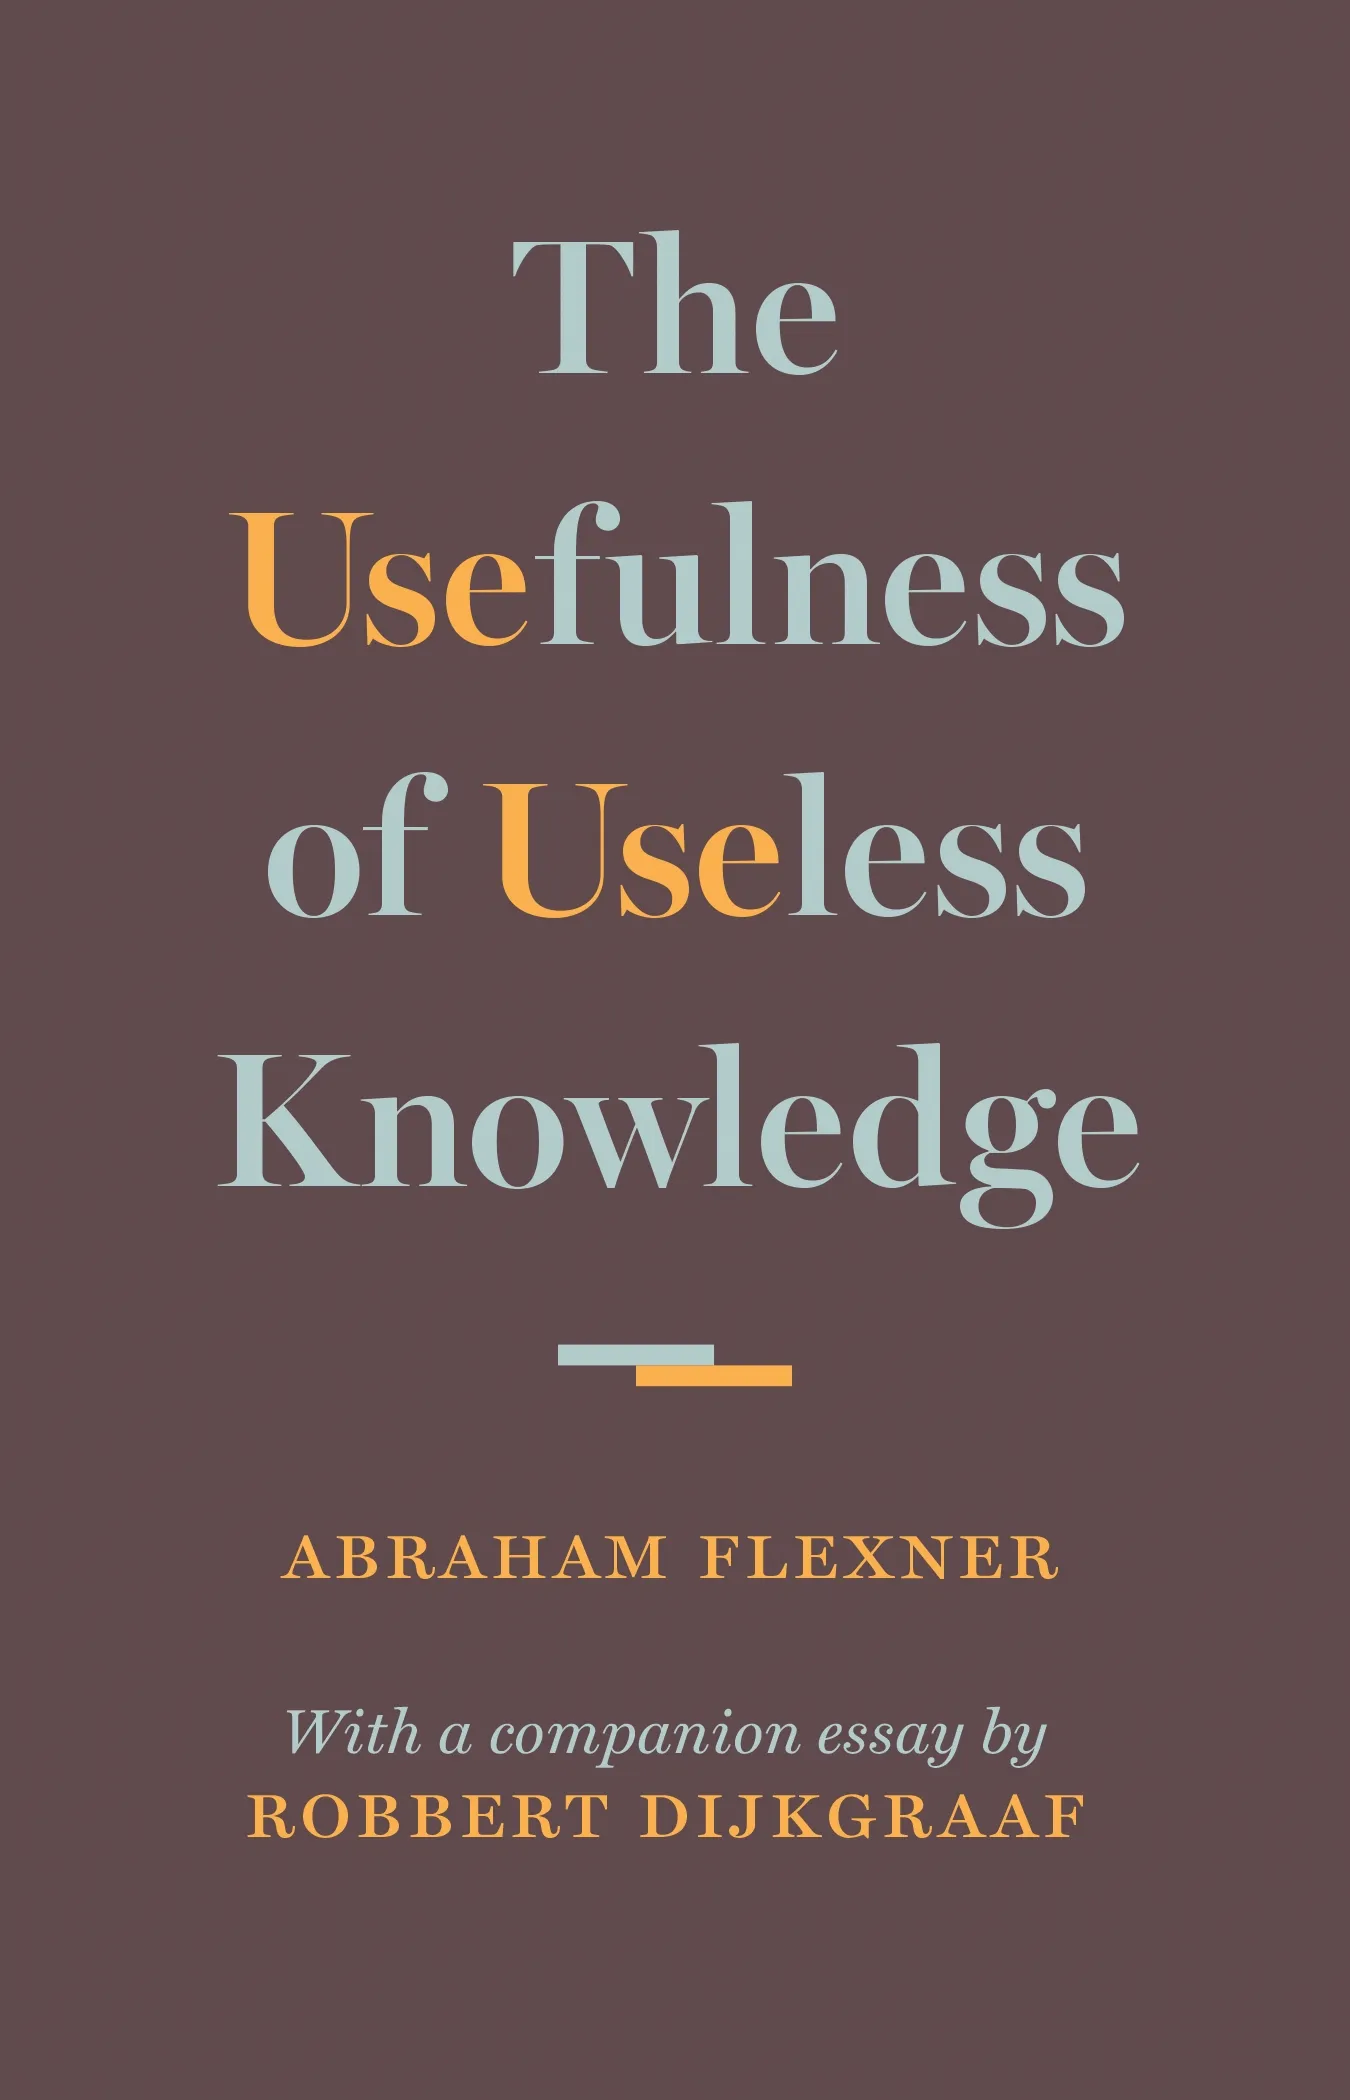 Cover of the book title The Usefulness of Useless Knowledge